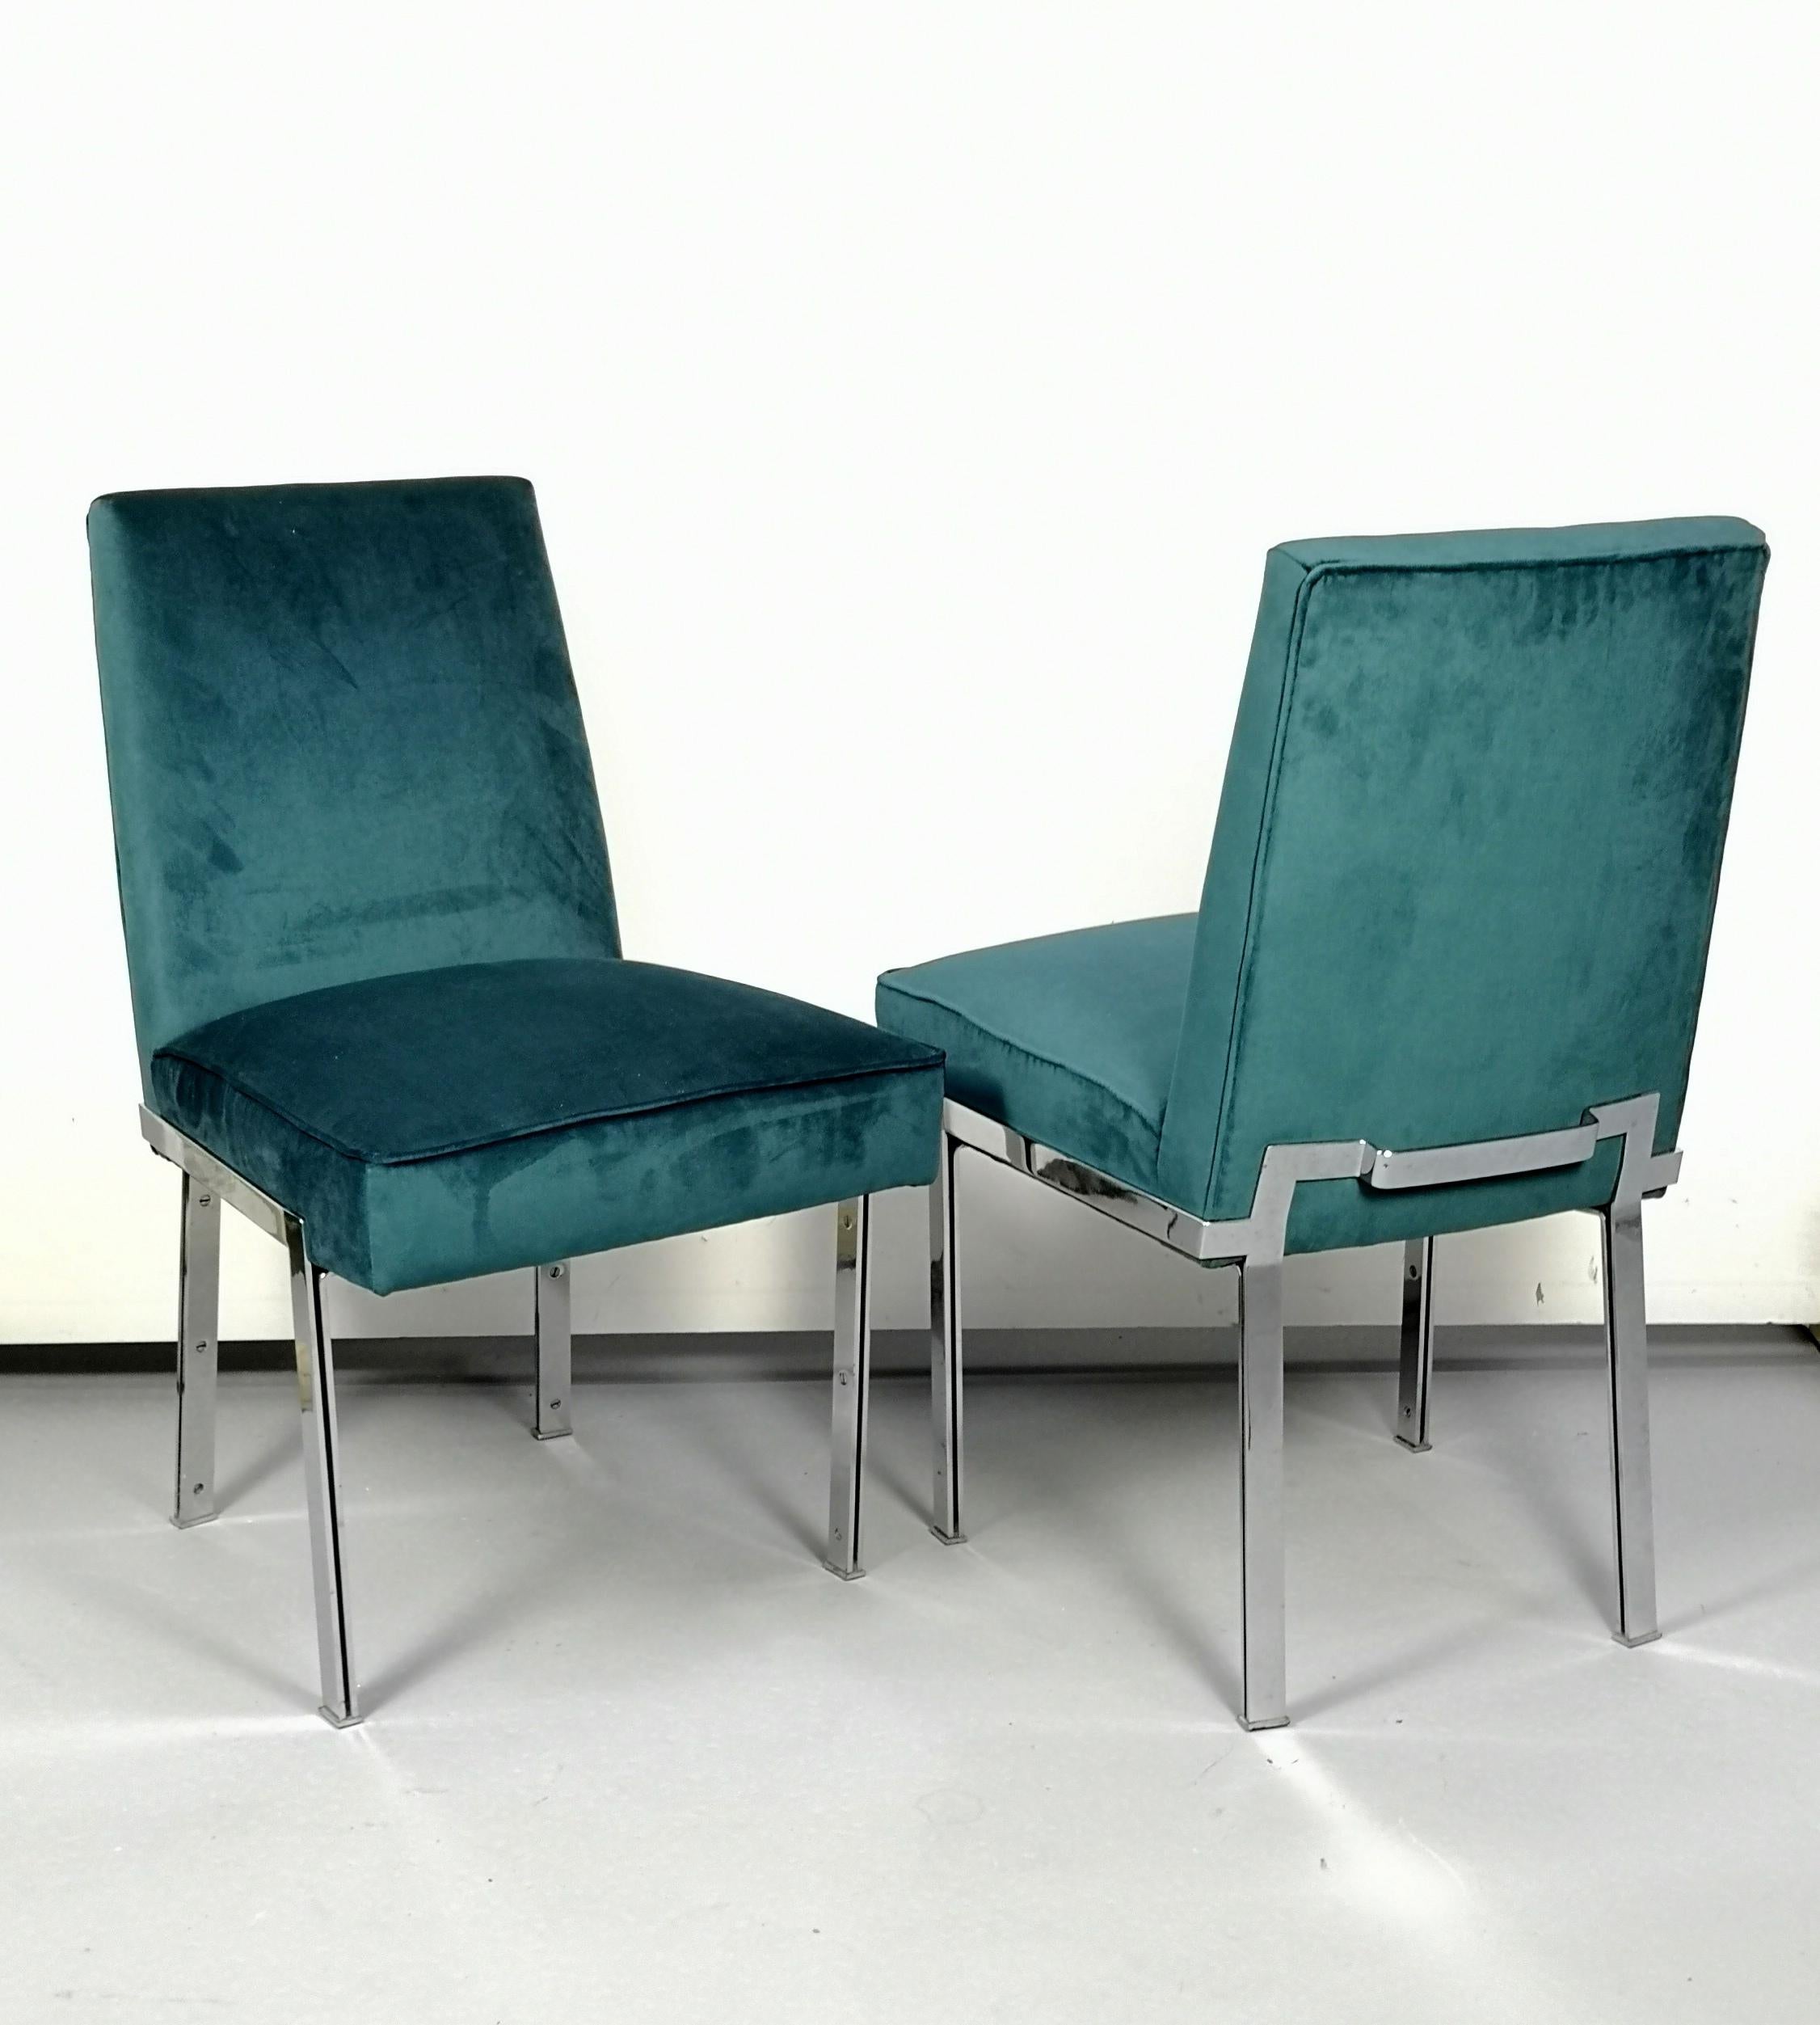 Fully re-upholstered with a turquoise high quality velvet, these heavy, chrome-plated steel chairs are of excellent design.